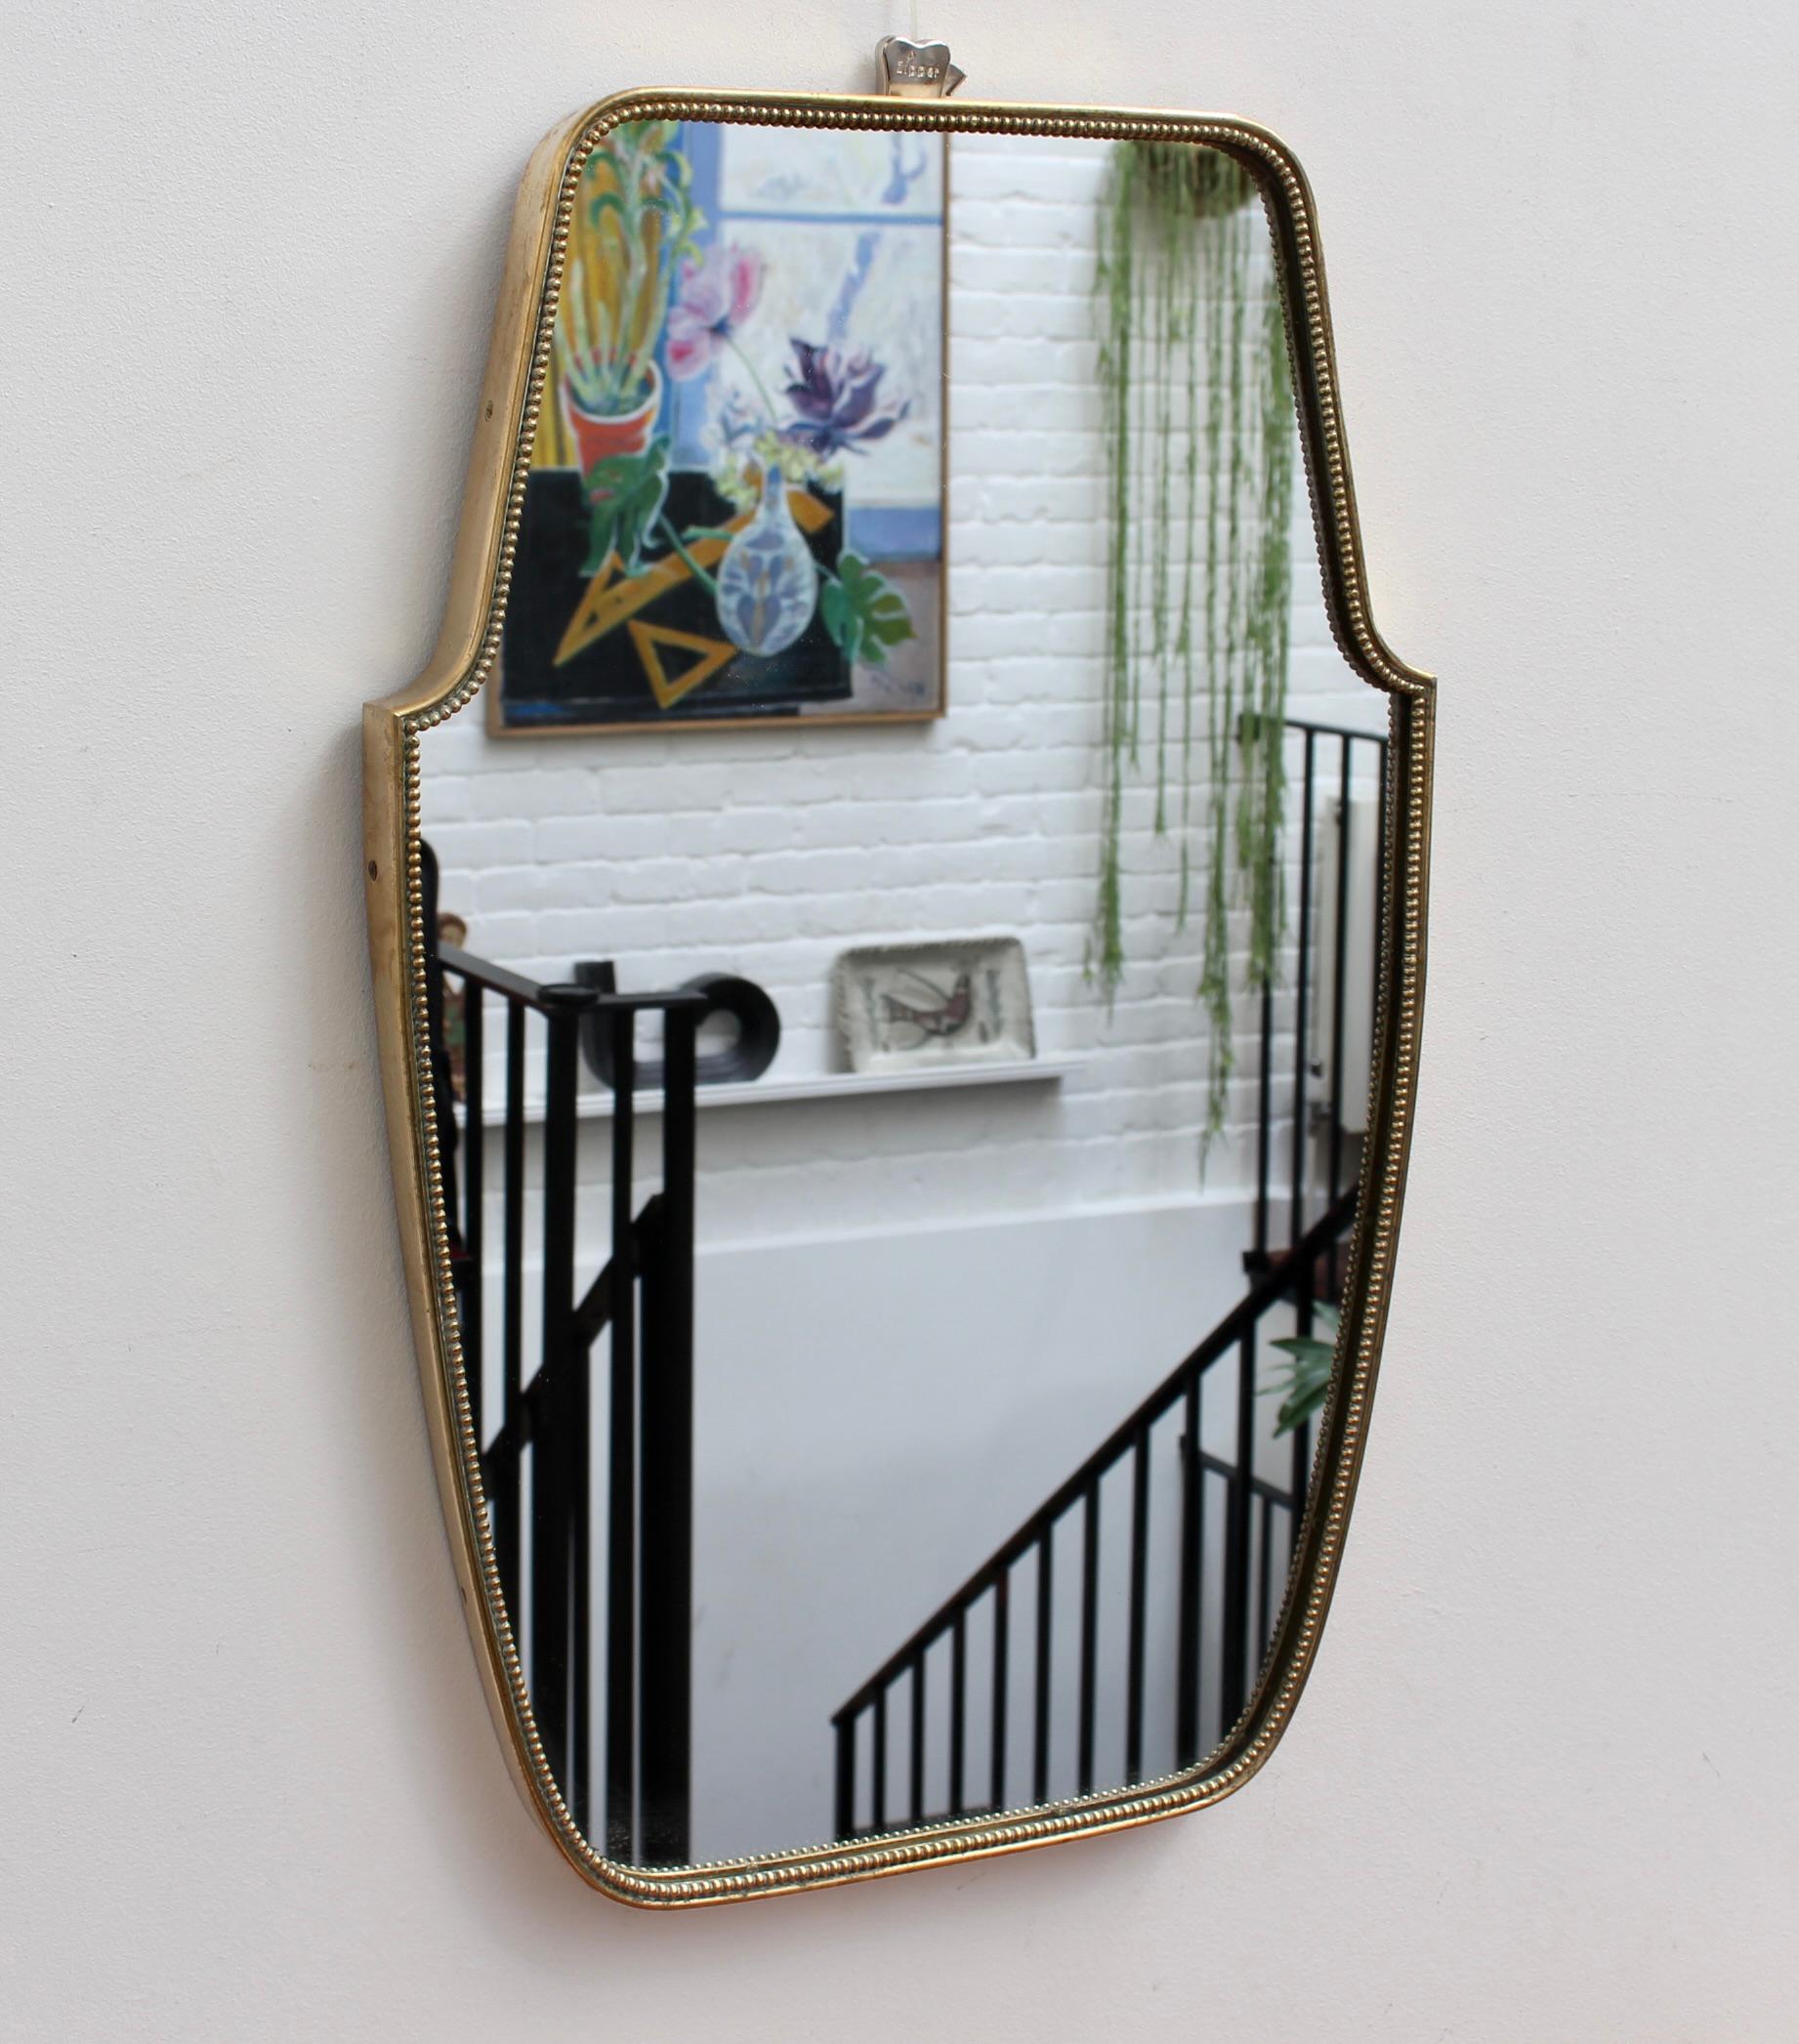 Mid-century Italian wall mirror with brass frame and beading (circa 1950s). This mirror is simply elegant and characterful in a modern, Gio Ponti style. It is small to medium sized, classically shaped, with a delightful beading adding visual